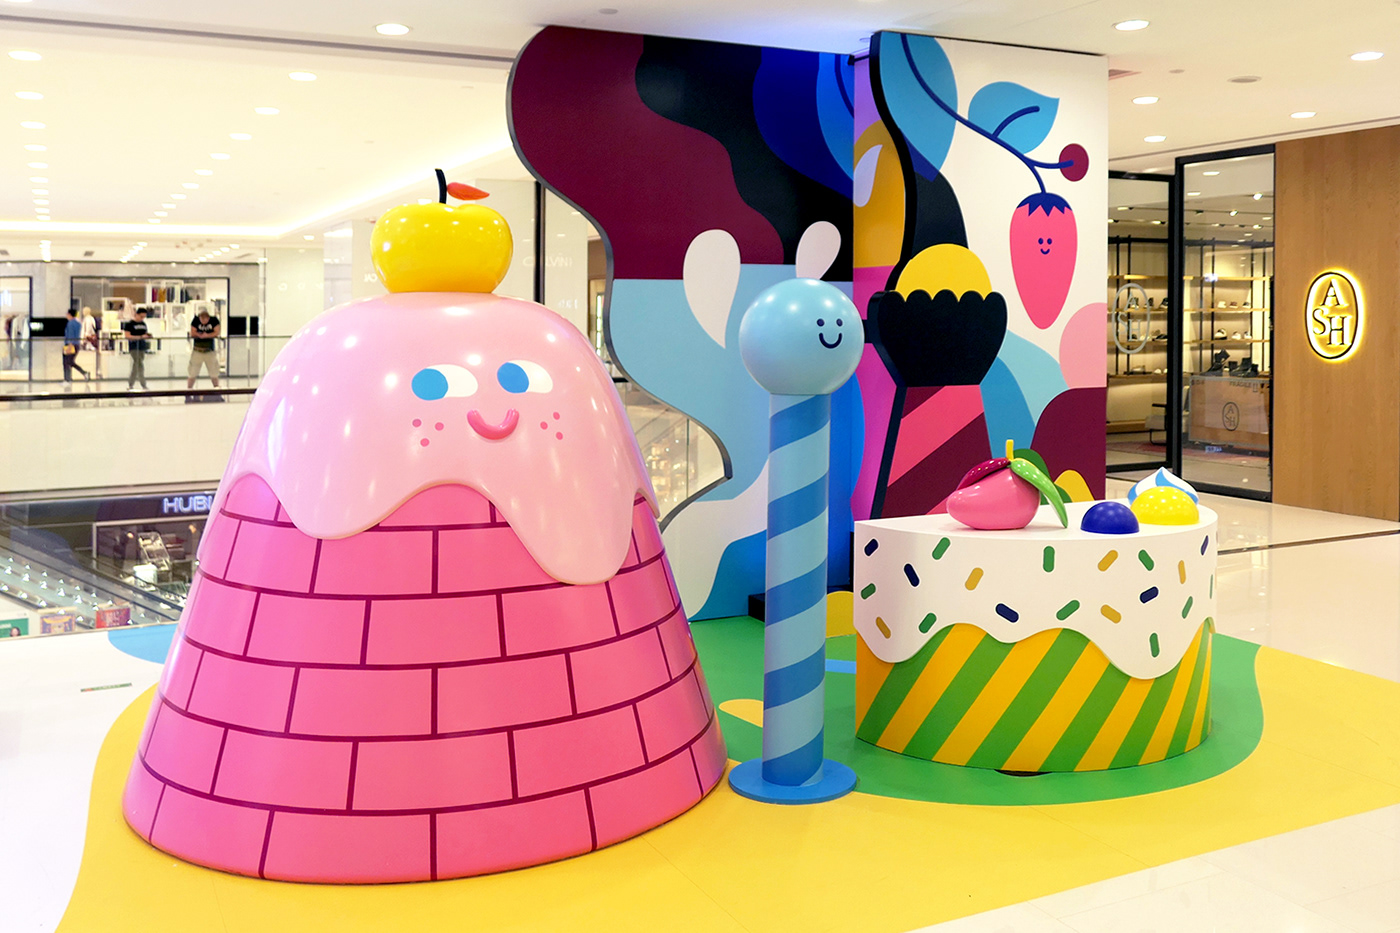 bold colors Chinese shopping mall contemporary illustration iinstallation design Illustrative identity lcx hong kong